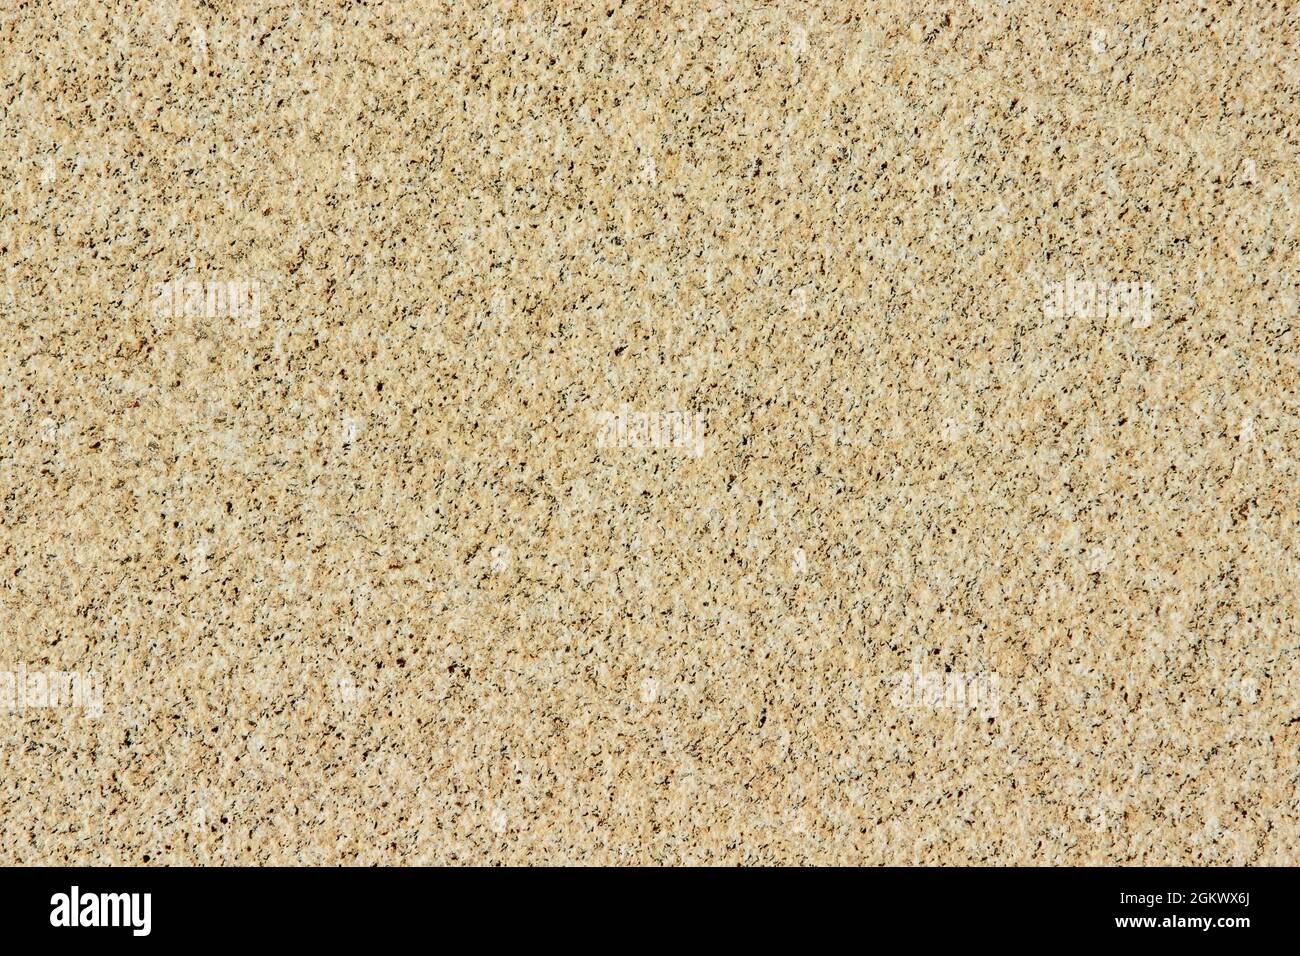 Surface structure of granite slab as background Stock Photo - Alamy